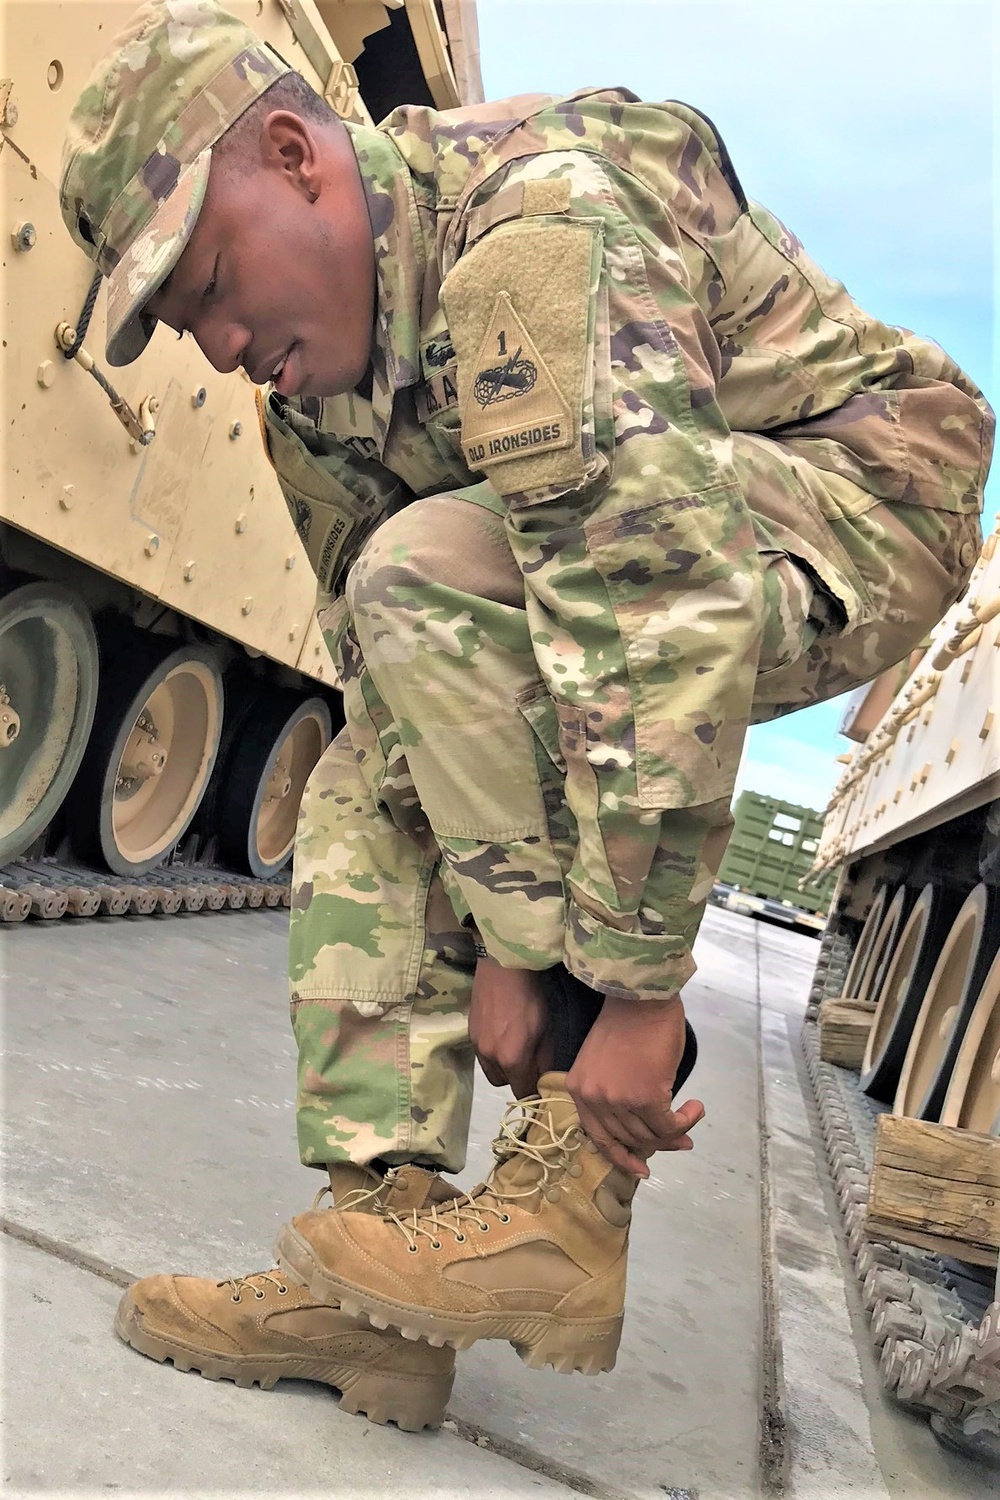 Iron Soldiers paves the way in Army footwear